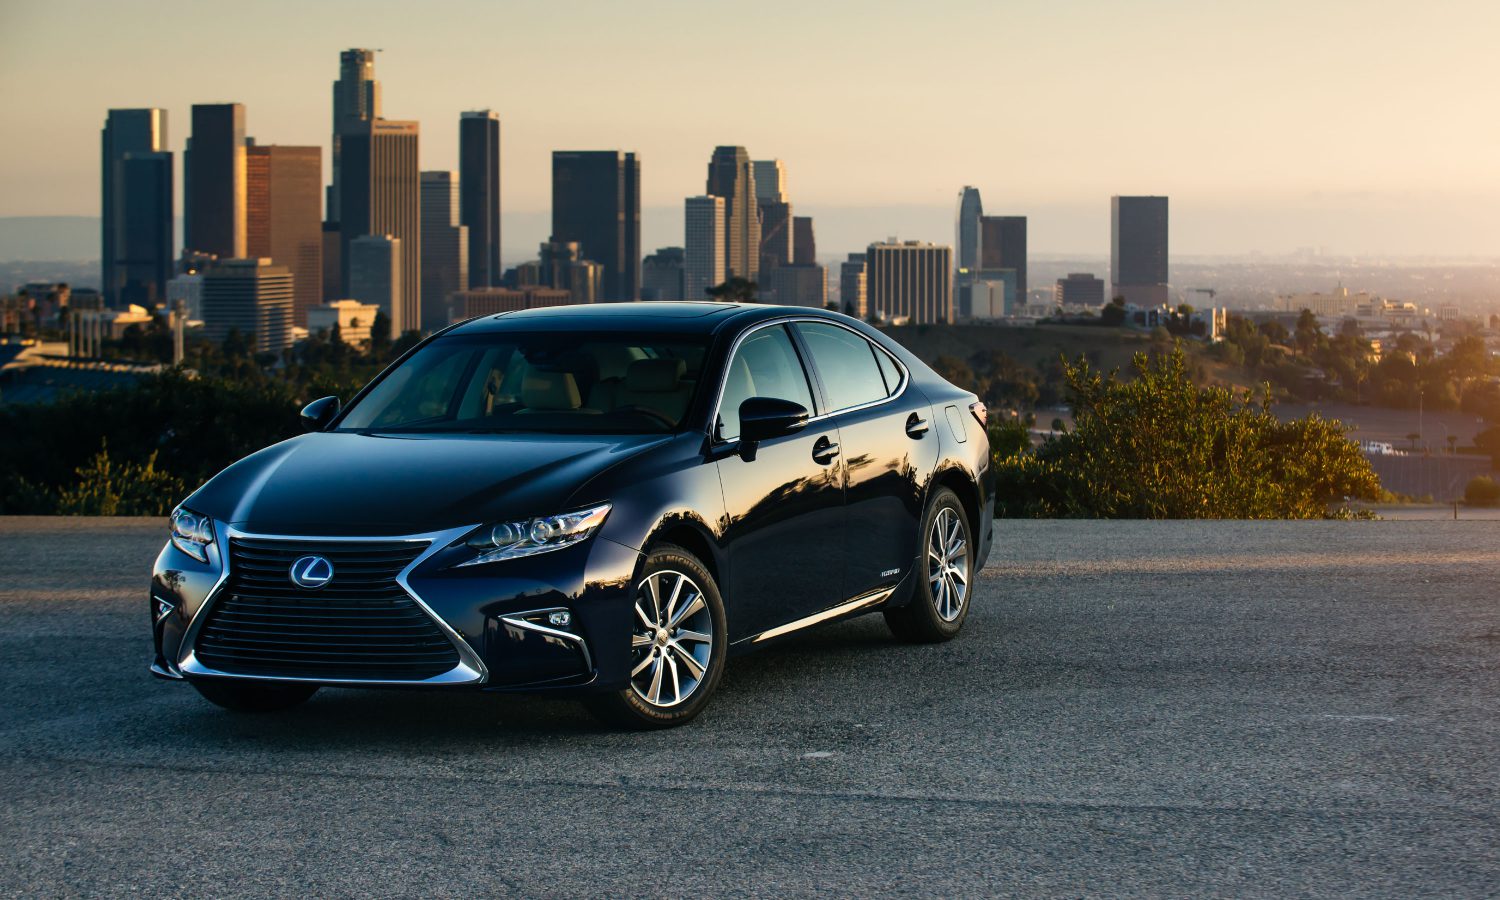 2018 Lexus ES 300h Hits the Mark with Efficiency and Luxury - Lexus USA  Newsroom